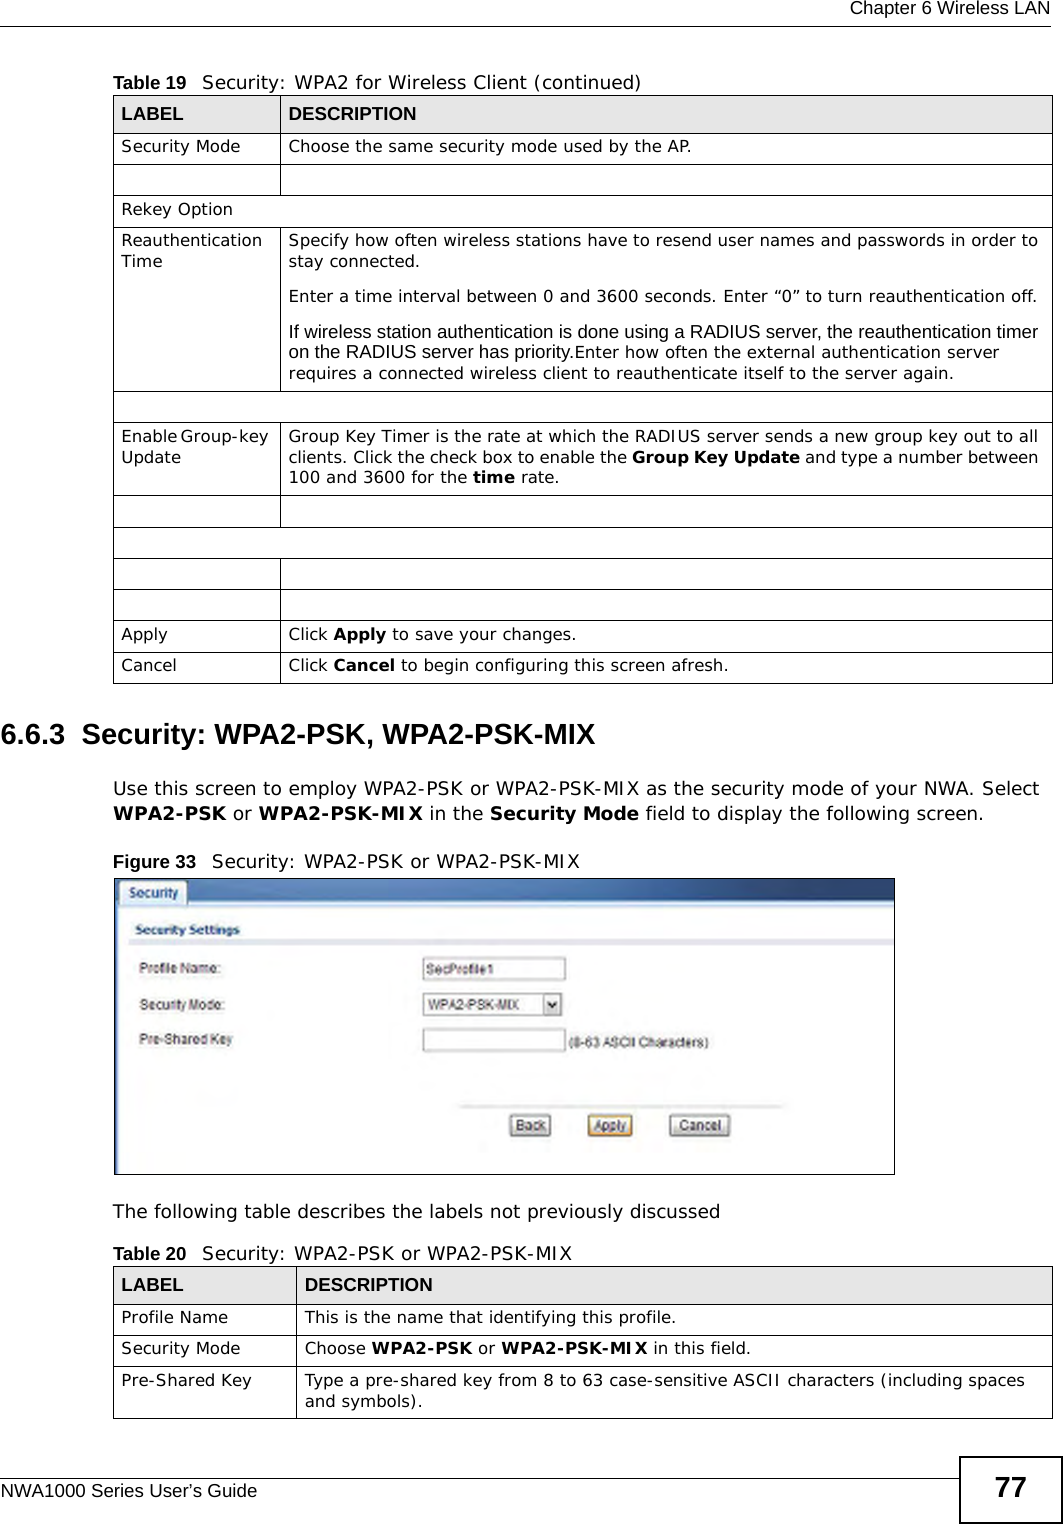  Chapter 6 Wireless LANNWA1000 Series User’s Guide 776.6.3  Security: WPA2-PSK, WPA2-PSK-MIXUse this screen to employ WPA2-PSK or WPA2-PSK-MIX as the security mode of your NWA. Select WPA2-PSK or WPA2-PSK-MIX in the Security Mode field to display the following screen.Figure 33   Security: WPA2-PSK or WPA2-PSK-MIXThe following table describes the labels not previously discussedSecurity Mode Choose the same security mode used by the AP.Rekey OptionReauthentication Time Specify how often wireless stations have to resend user names and passwords in order to stay connected. Enter a time interval between 0 and 3600 seconds. Enter “0” to turn reauthentication off. If wireless station authentication is done using a RADIUS server, the reauthentication timer on the RADIUS server has priority.Enter how often the external authentication server requires a connected wireless client to reauthenticate itself to the server again.Enable Group-key Update Group Key Timer is the rate at which the RADIUS server sends a new group key out to all clients. Click the check box to enable the Group Key Update and type a number between 100 and 3600 for the time rate.Apply Click Apply to save your changes.Cancel Click Cancel to begin configuring this screen afresh.Table 19   Security: WPA2 for Wireless Client (continued)LABEL DESCRIPTIONTable 20   Security: WPA2-PSK or WPA2-PSK-MIXLABEL DESCRIPTIONProfile Name This is the name that identifying this profile.Security Mode Choose WPA2-PSK or WPA2-PSK-MIX in this field.Pre-Shared Key Type a pre-shared key from 8 to 63 case-sensitive ASCII characters (including spaces and symbols).